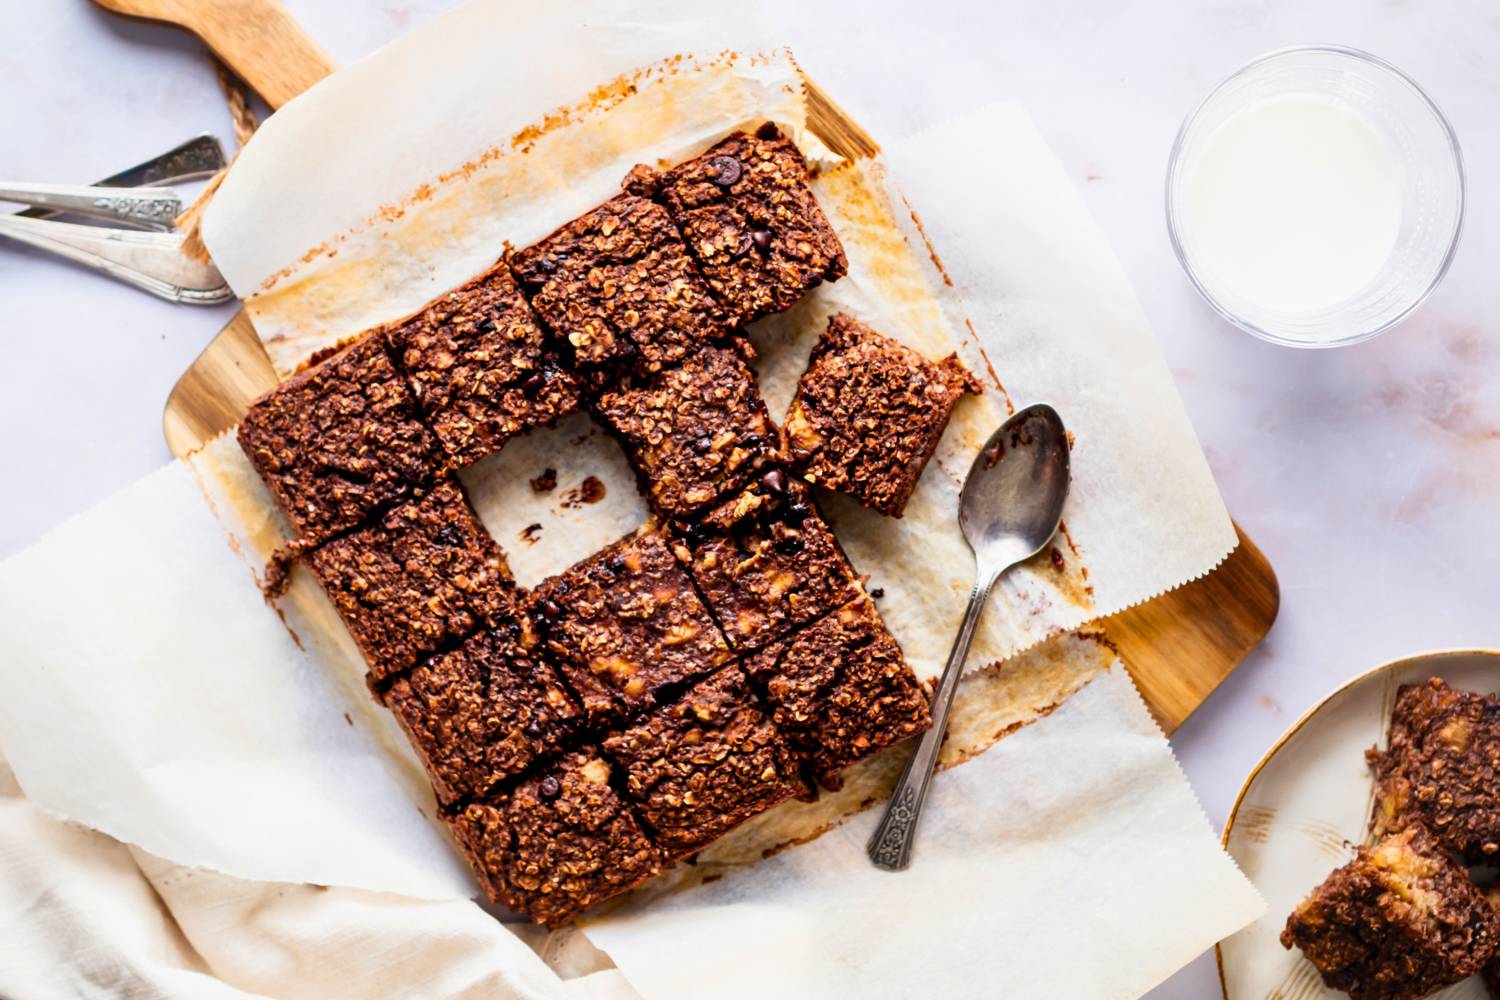 Baked chocolate oatmeal for breakfast cut into squares on a cutting board.